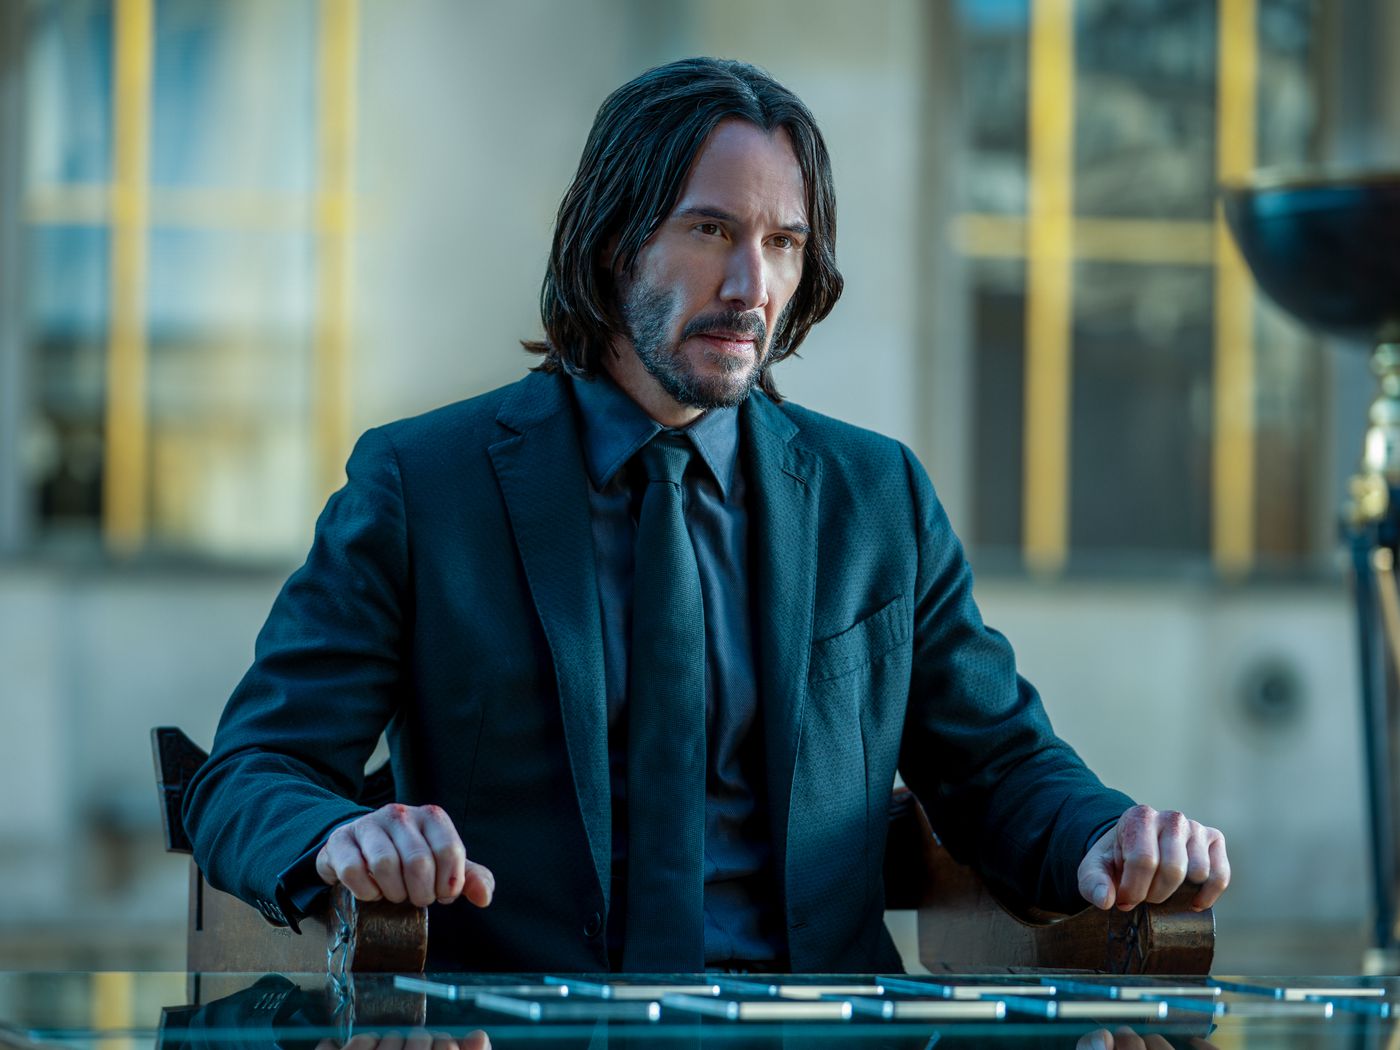 10 Movies Like John Wick to Watch if You Love Action